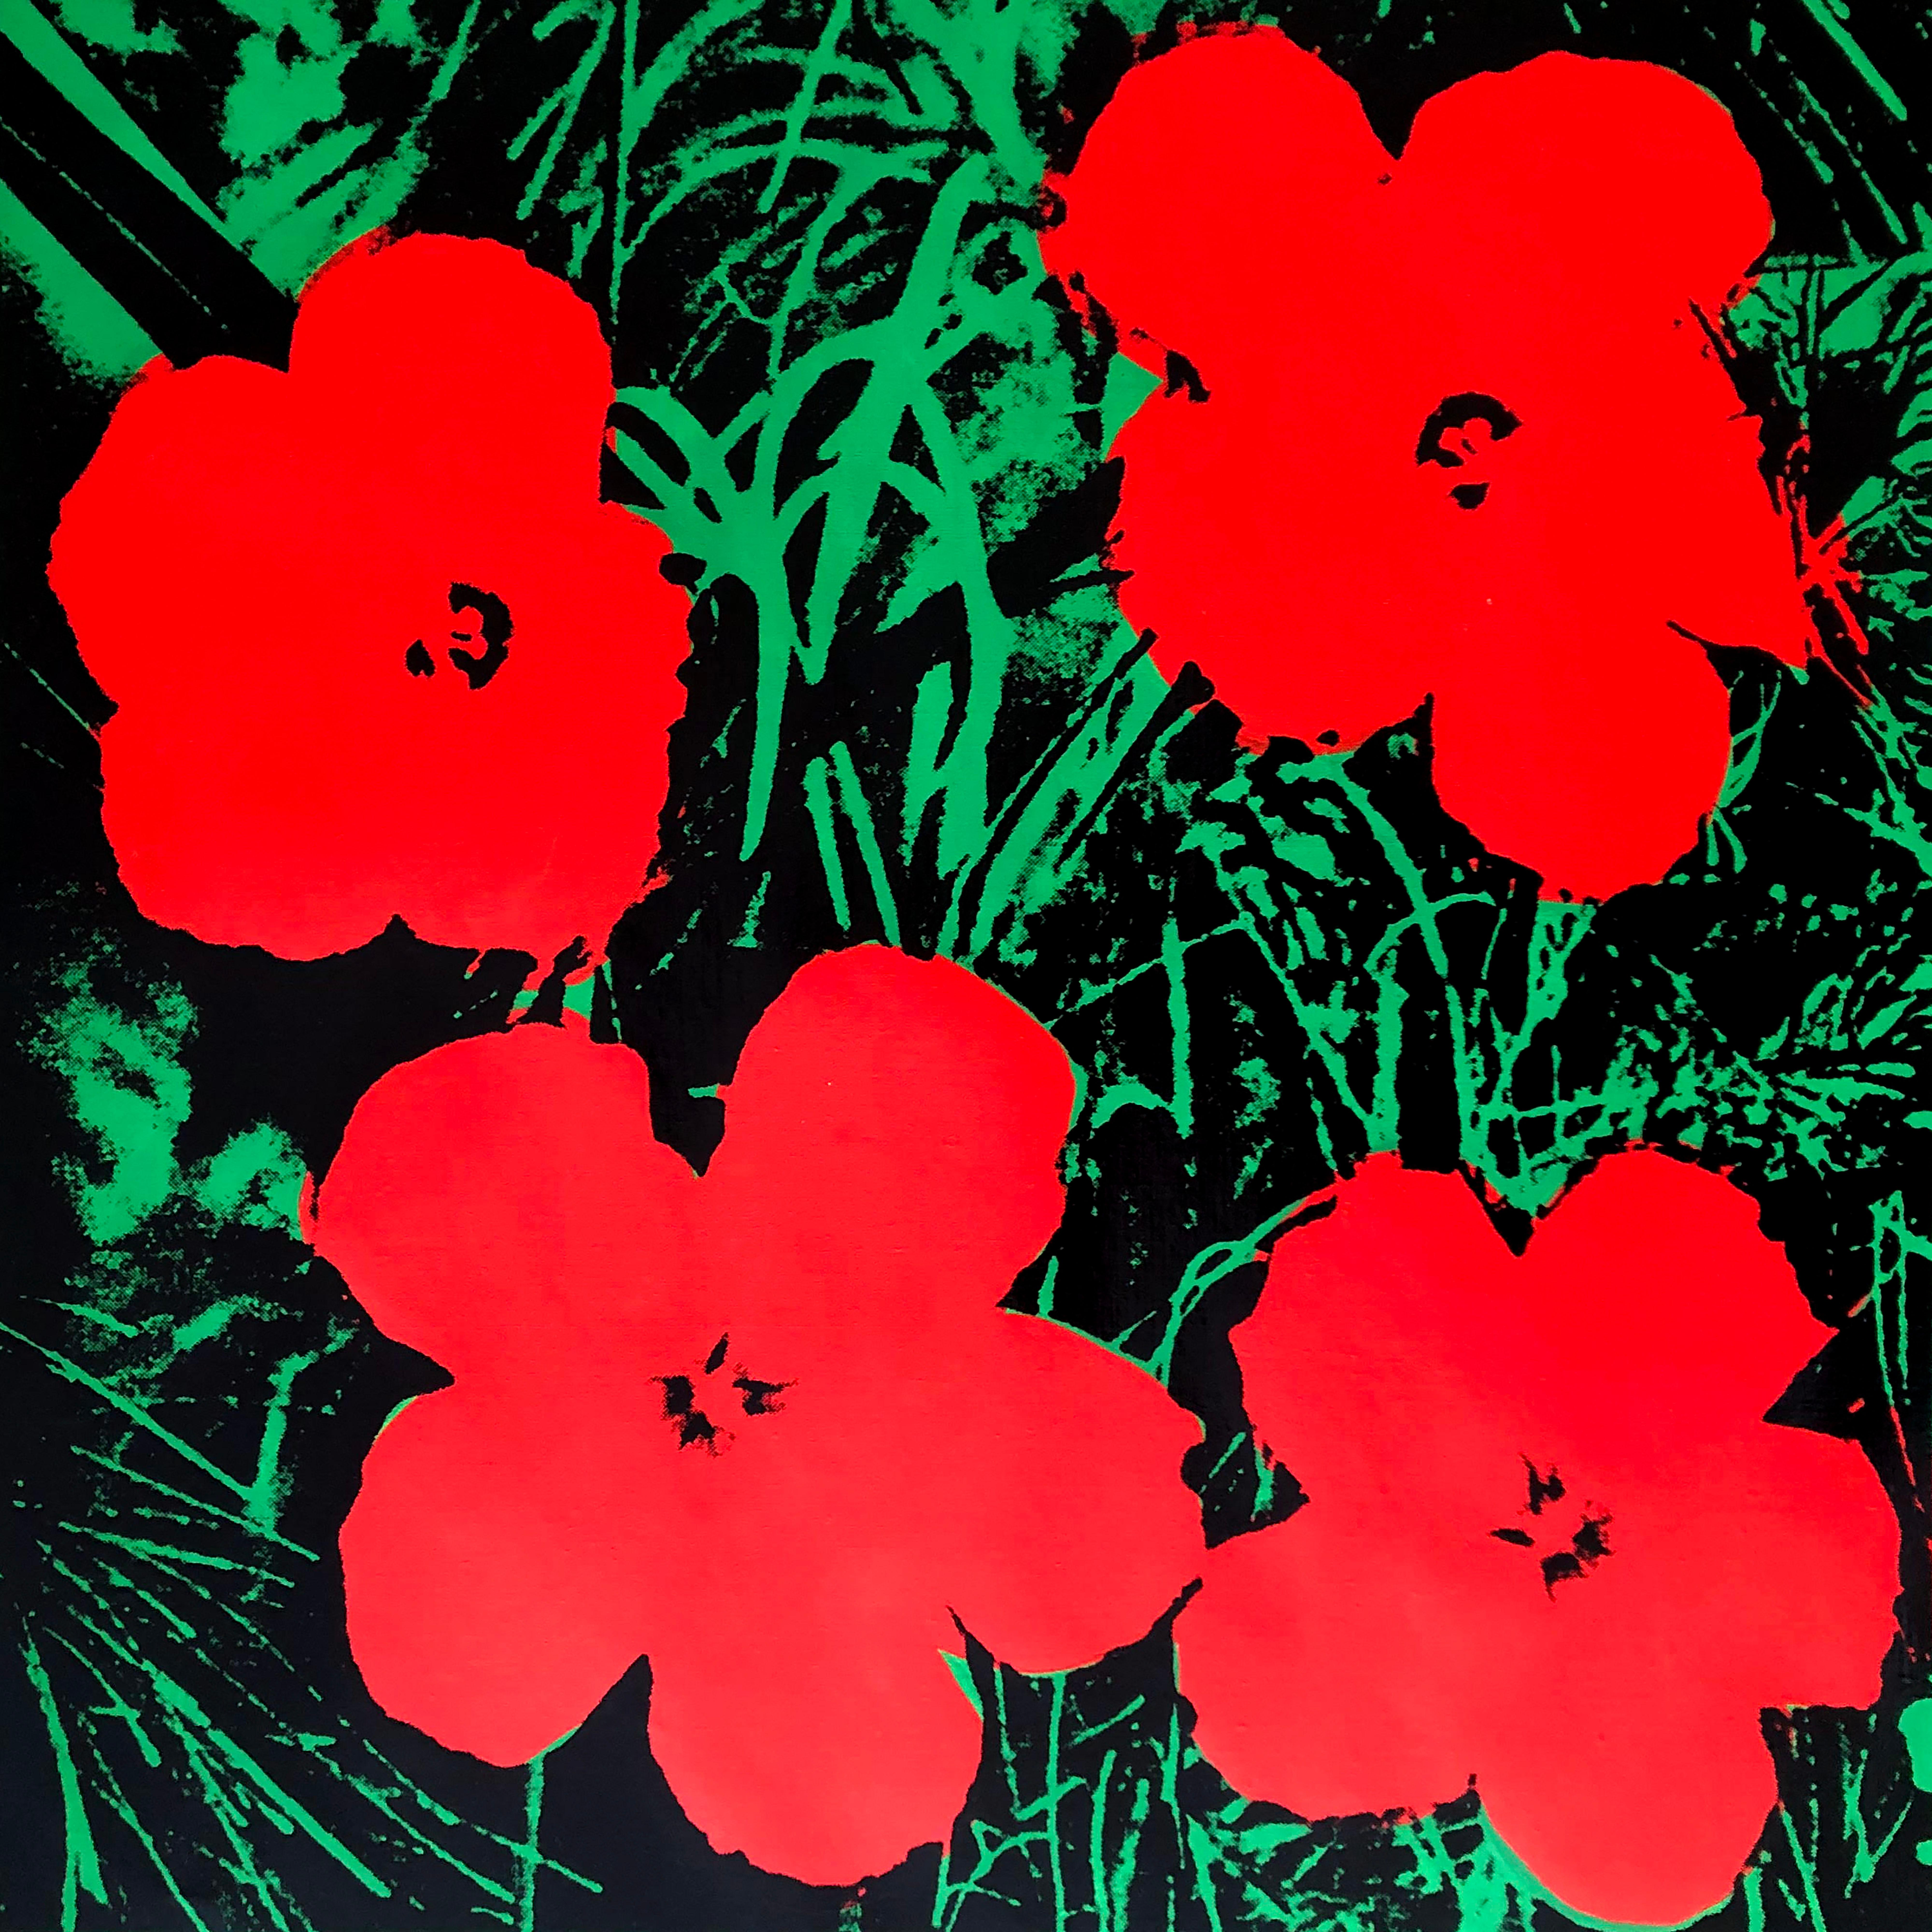 Denied Warhol Flowers, (Red) Silkscreen Linen Painting by Charles Lutz
Silkscreen and acrylic on linen with Denied stamp of the Andy Warhol Art Authentication Board. 
24 x 24" inches 
2008

Lutz's 2007 ''Warhol Denied'' series gained international